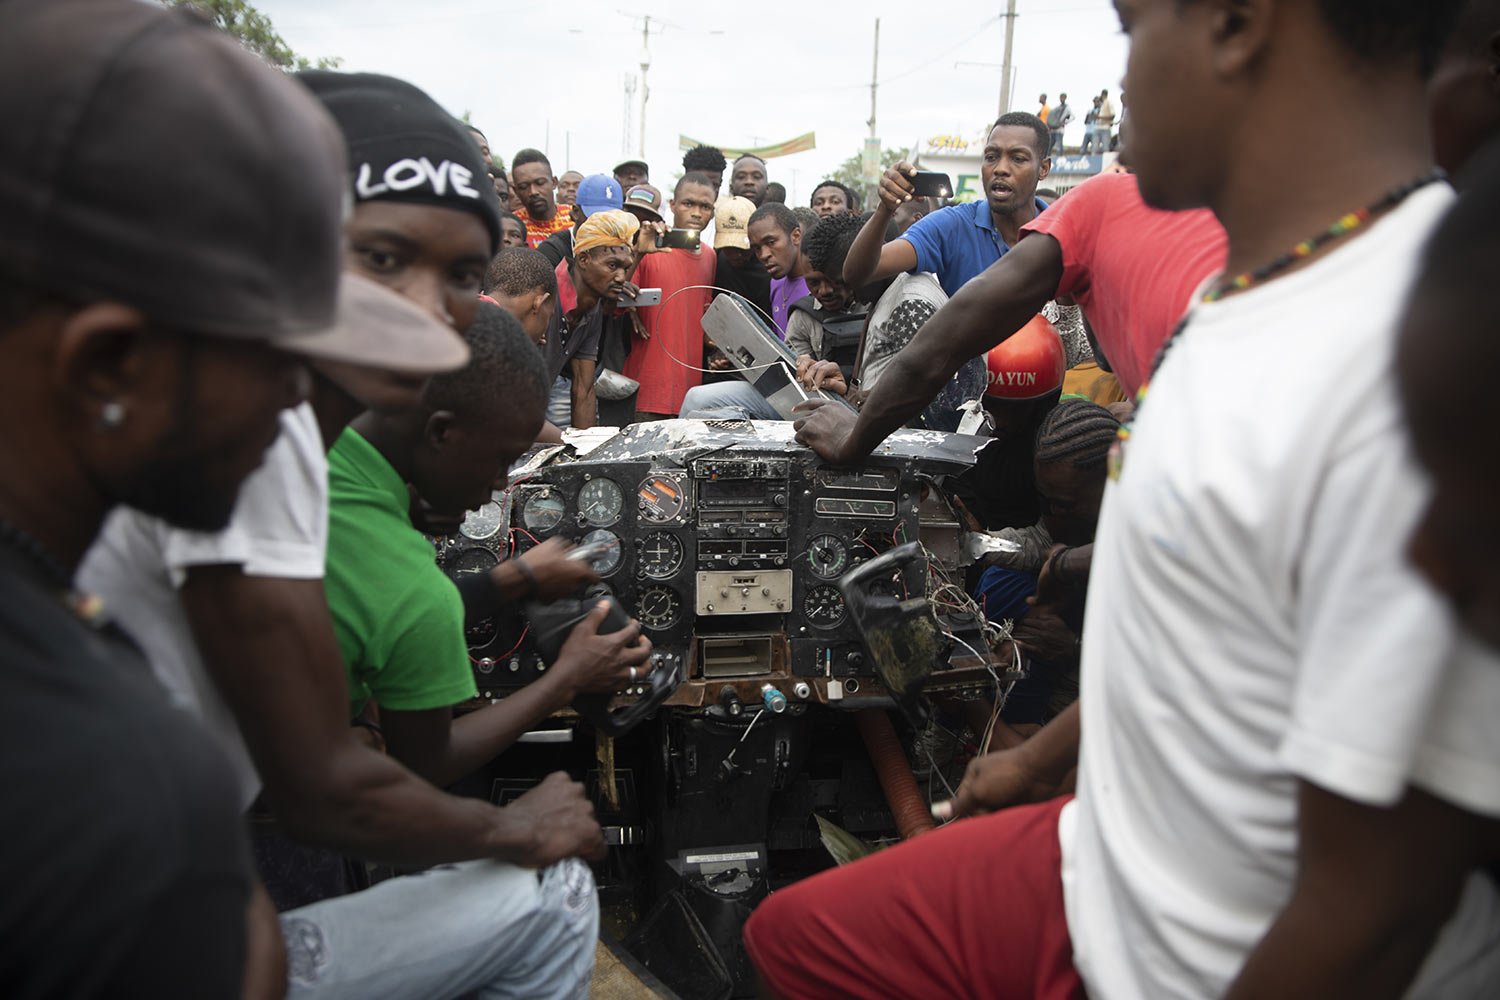  People look at the instrument panel of a small plane that crashed in the community of Carrefour, Port-au-Prince, Haiti, April 20, 2022. Police report that the plane was headed to the southern coastal city of Jacmel when it tried to land in Carrefour